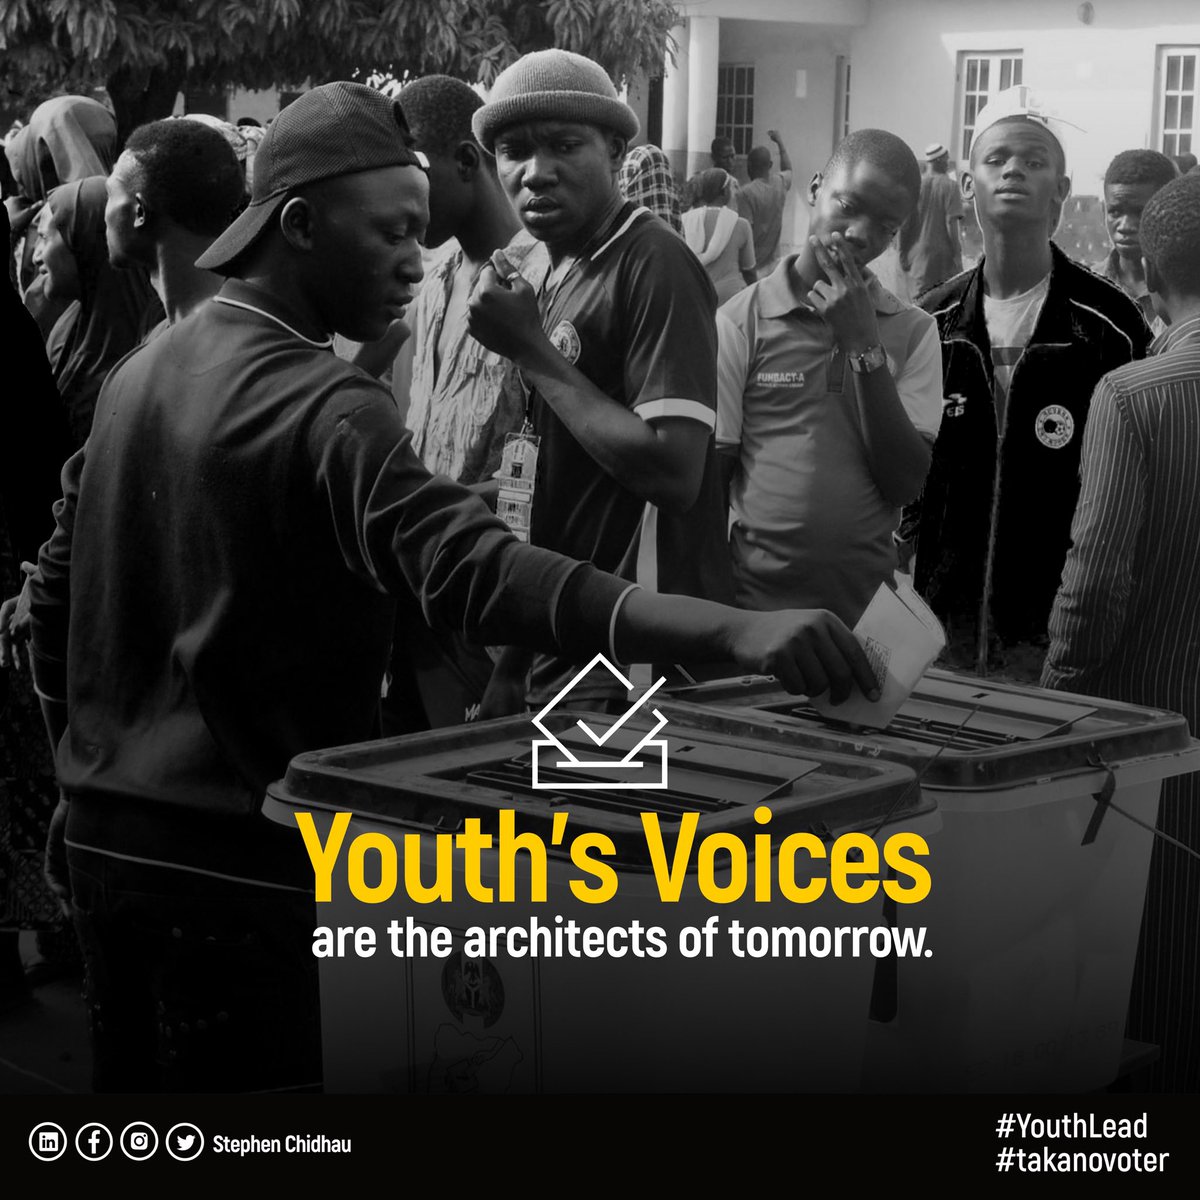 The future is ours to mold. Let's wield the power of our vote to carve the path we want to walk. #YouthVoteMatters 
#takanovoter